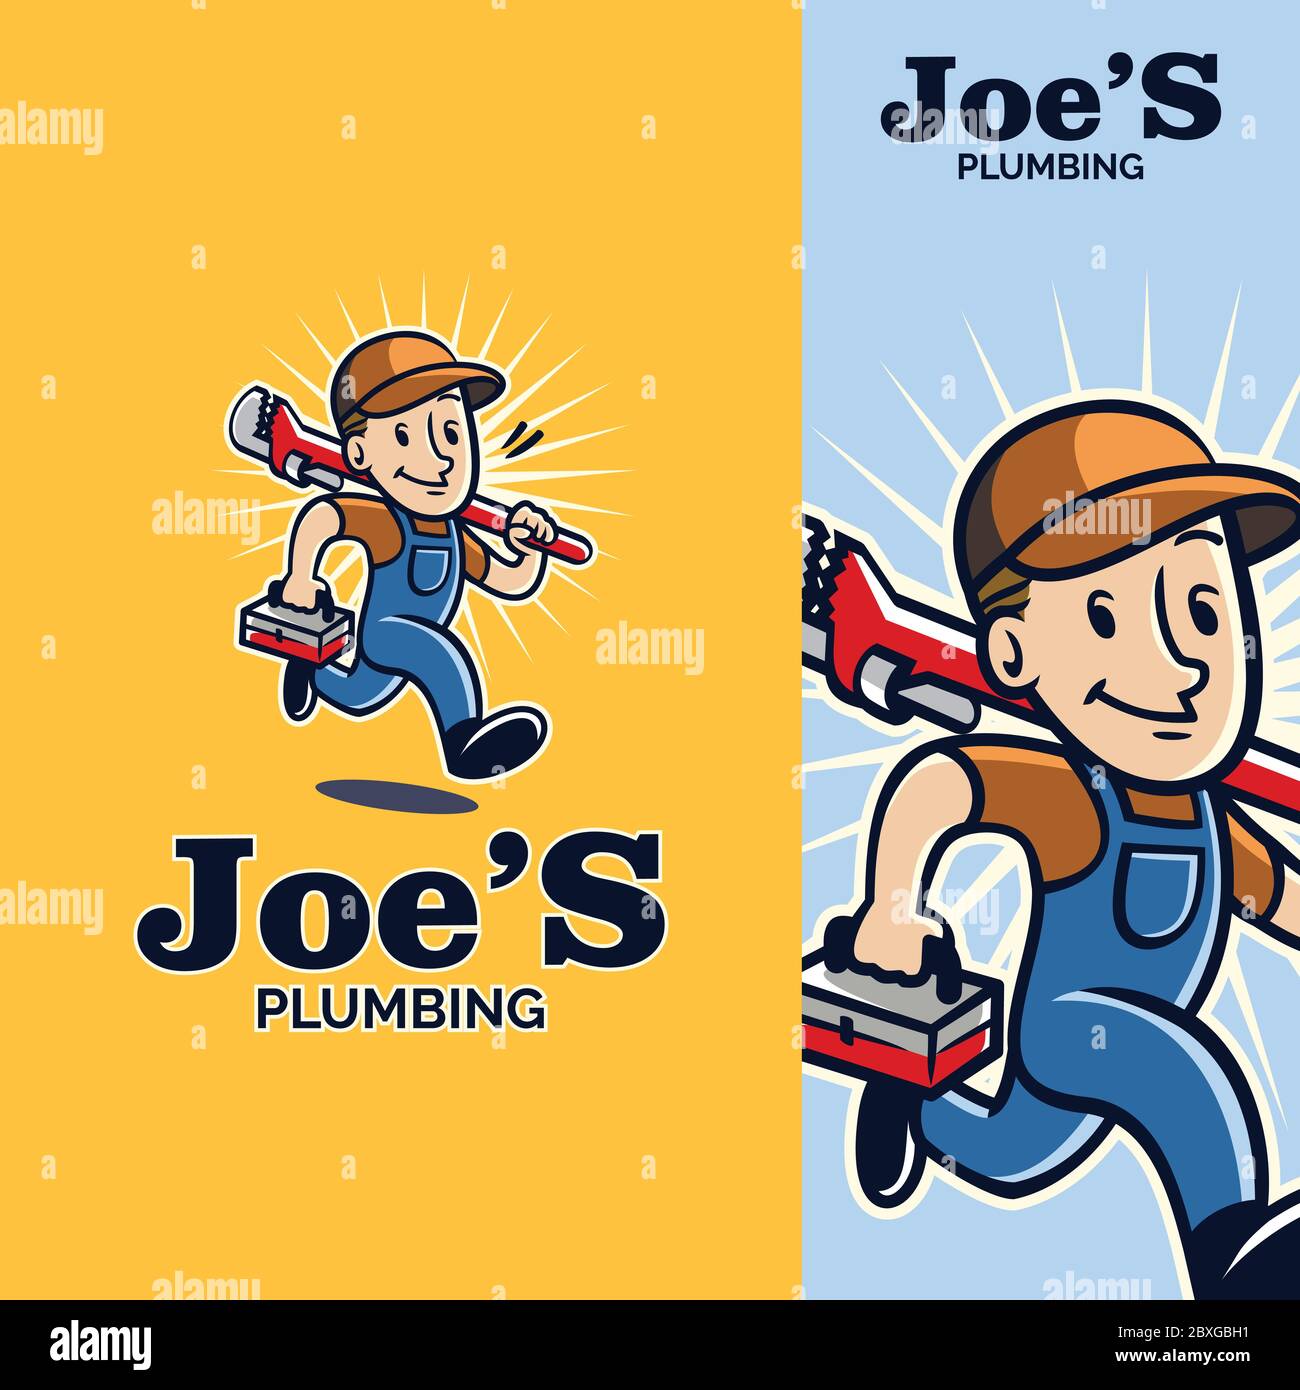 PLumber Service Character Stock Vector